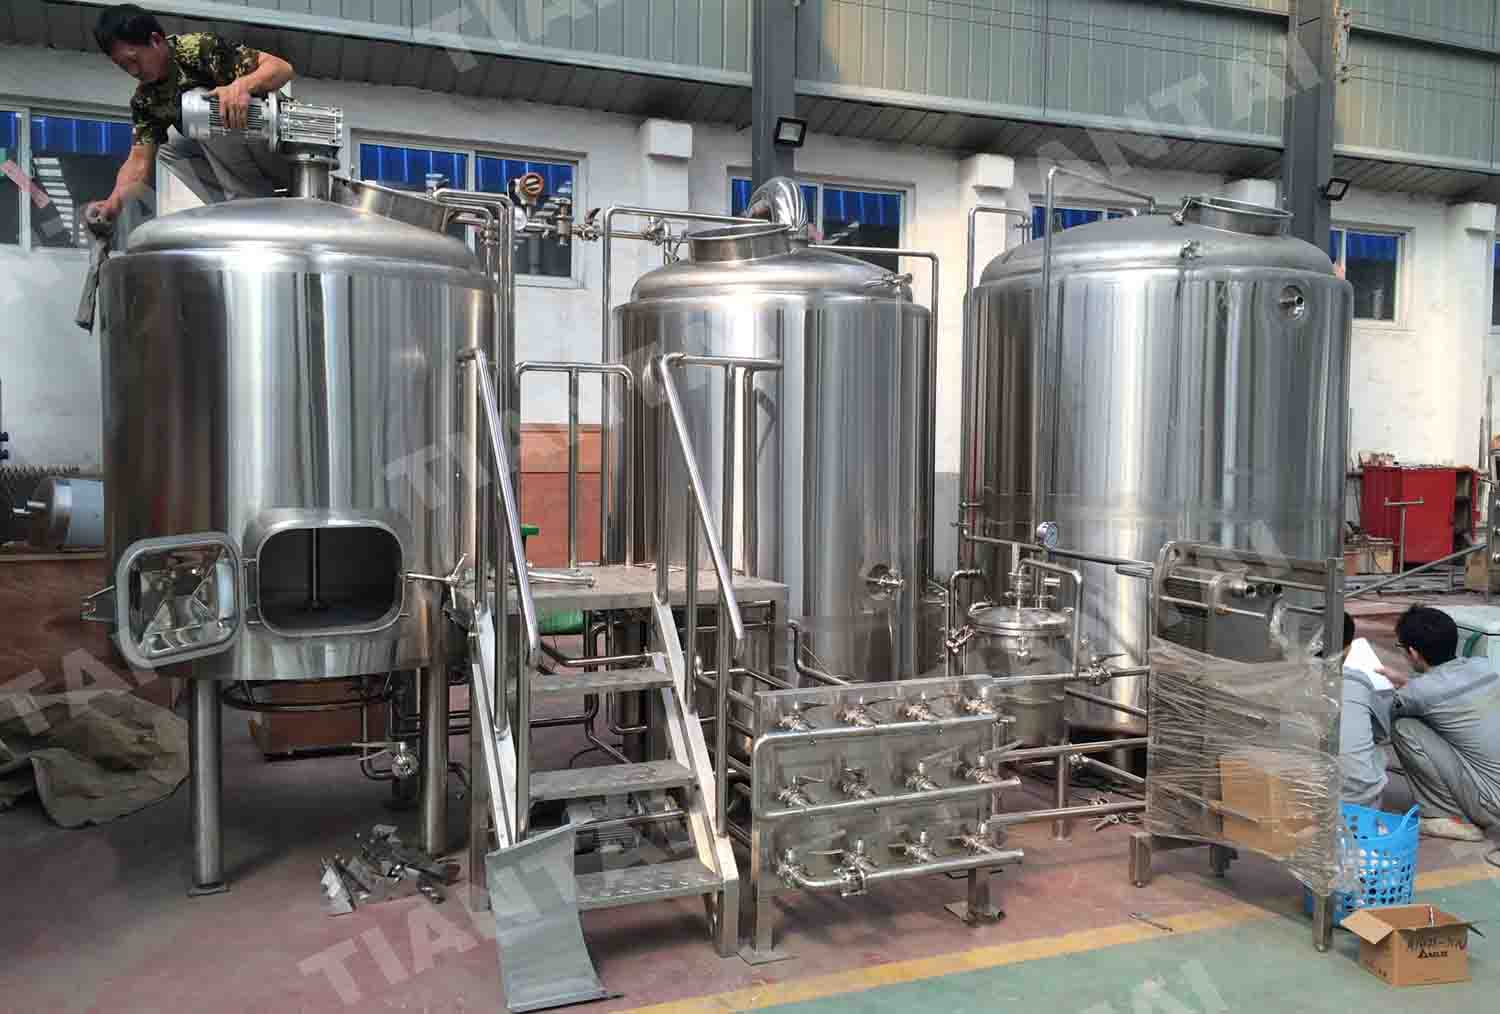 Turnkey 10bbl beer brewery system delivered to US